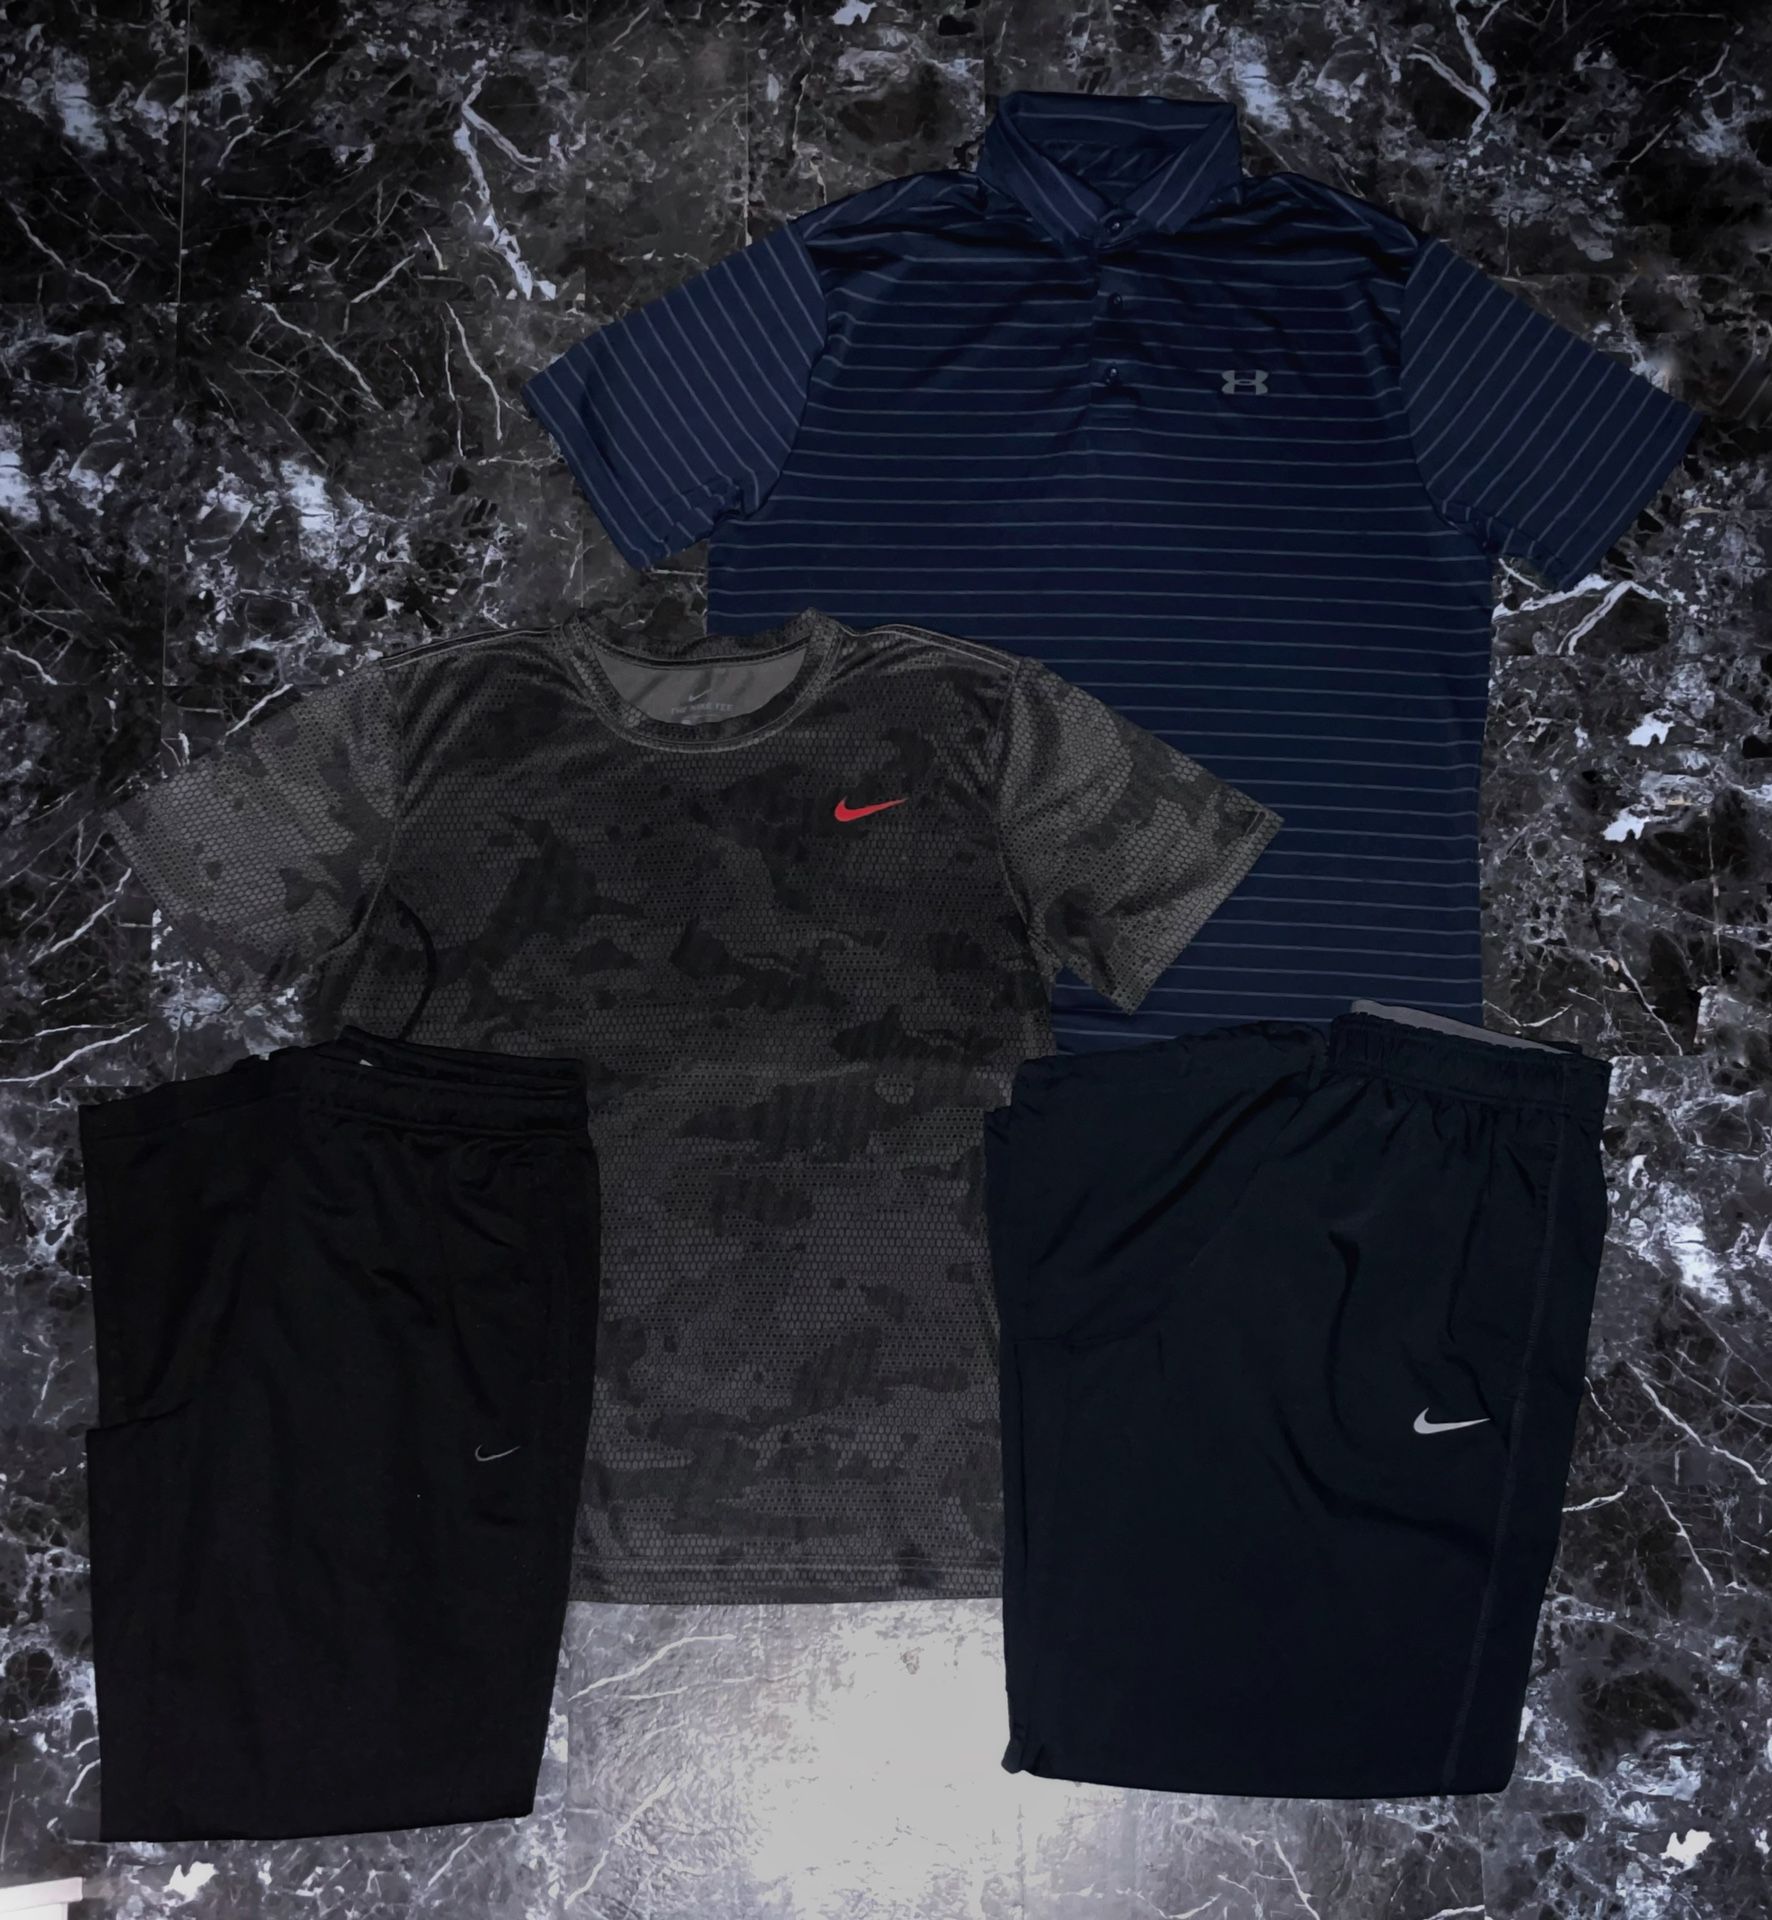 Under Armour + Nike Lot for Sale in Midland, TX - OfferUp